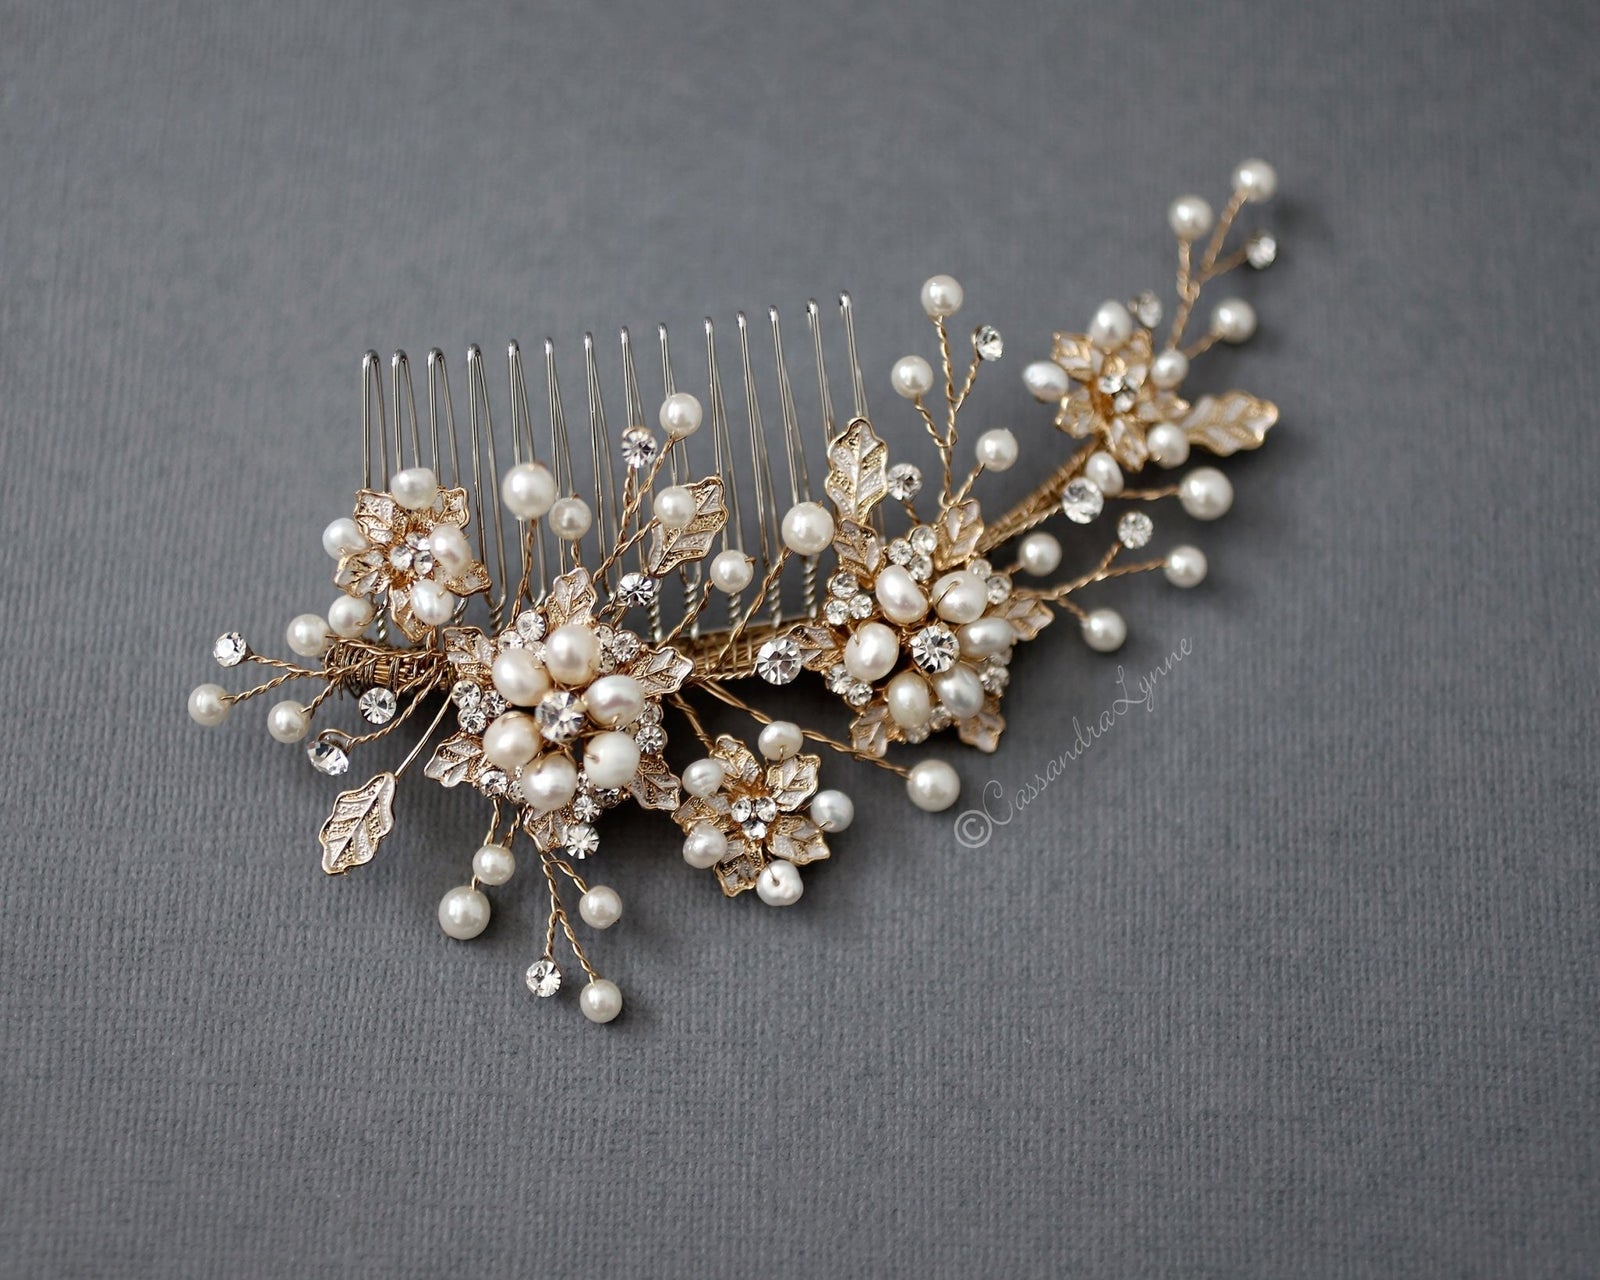 Gold Bridal Comb With Holly Leaves and Pearls - Cassandra Lynne